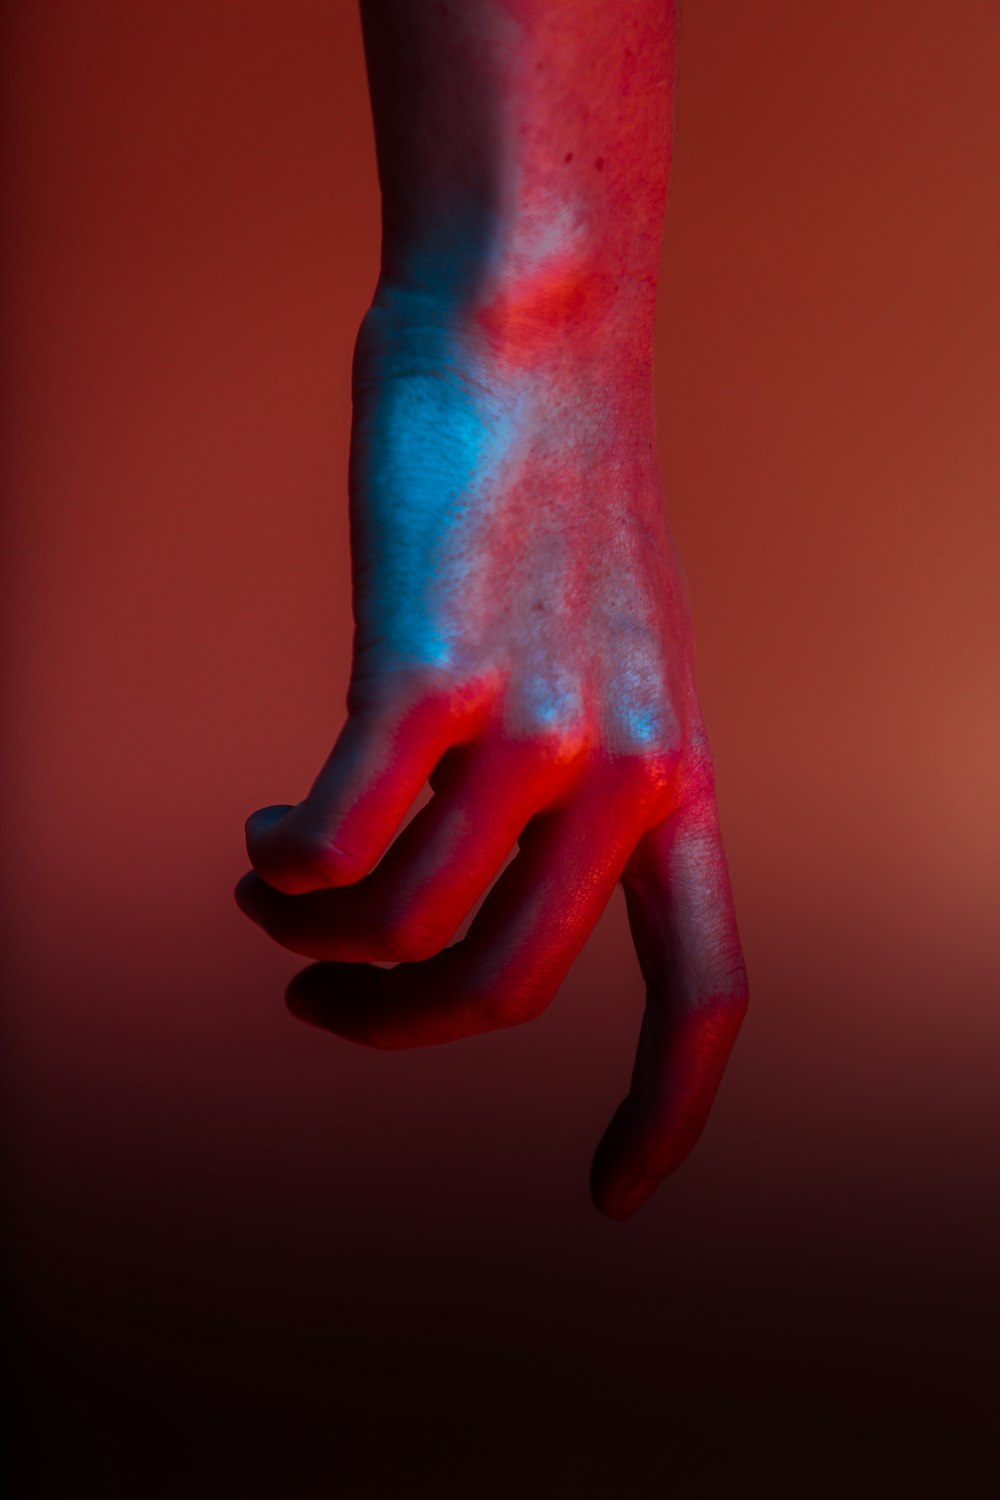 shallow focus photography of hand with red paint